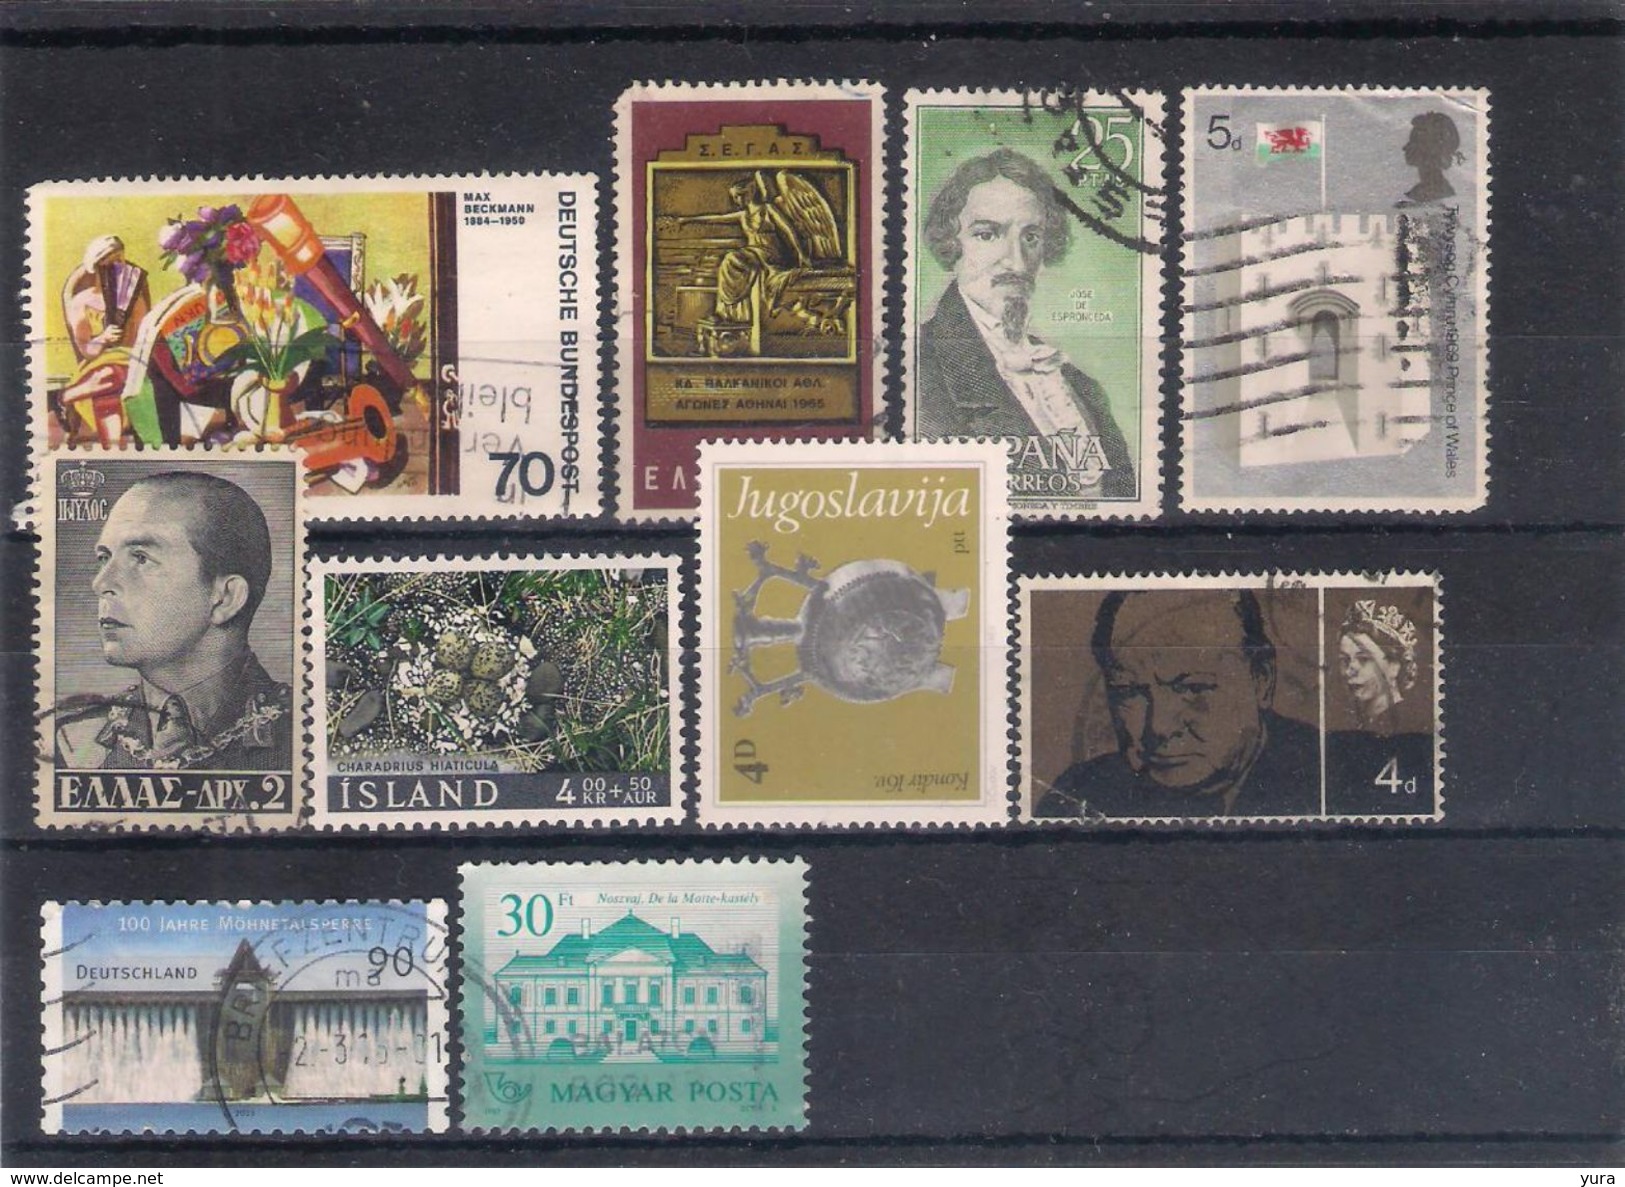 Lot 39  Europe  335   different MNH, used